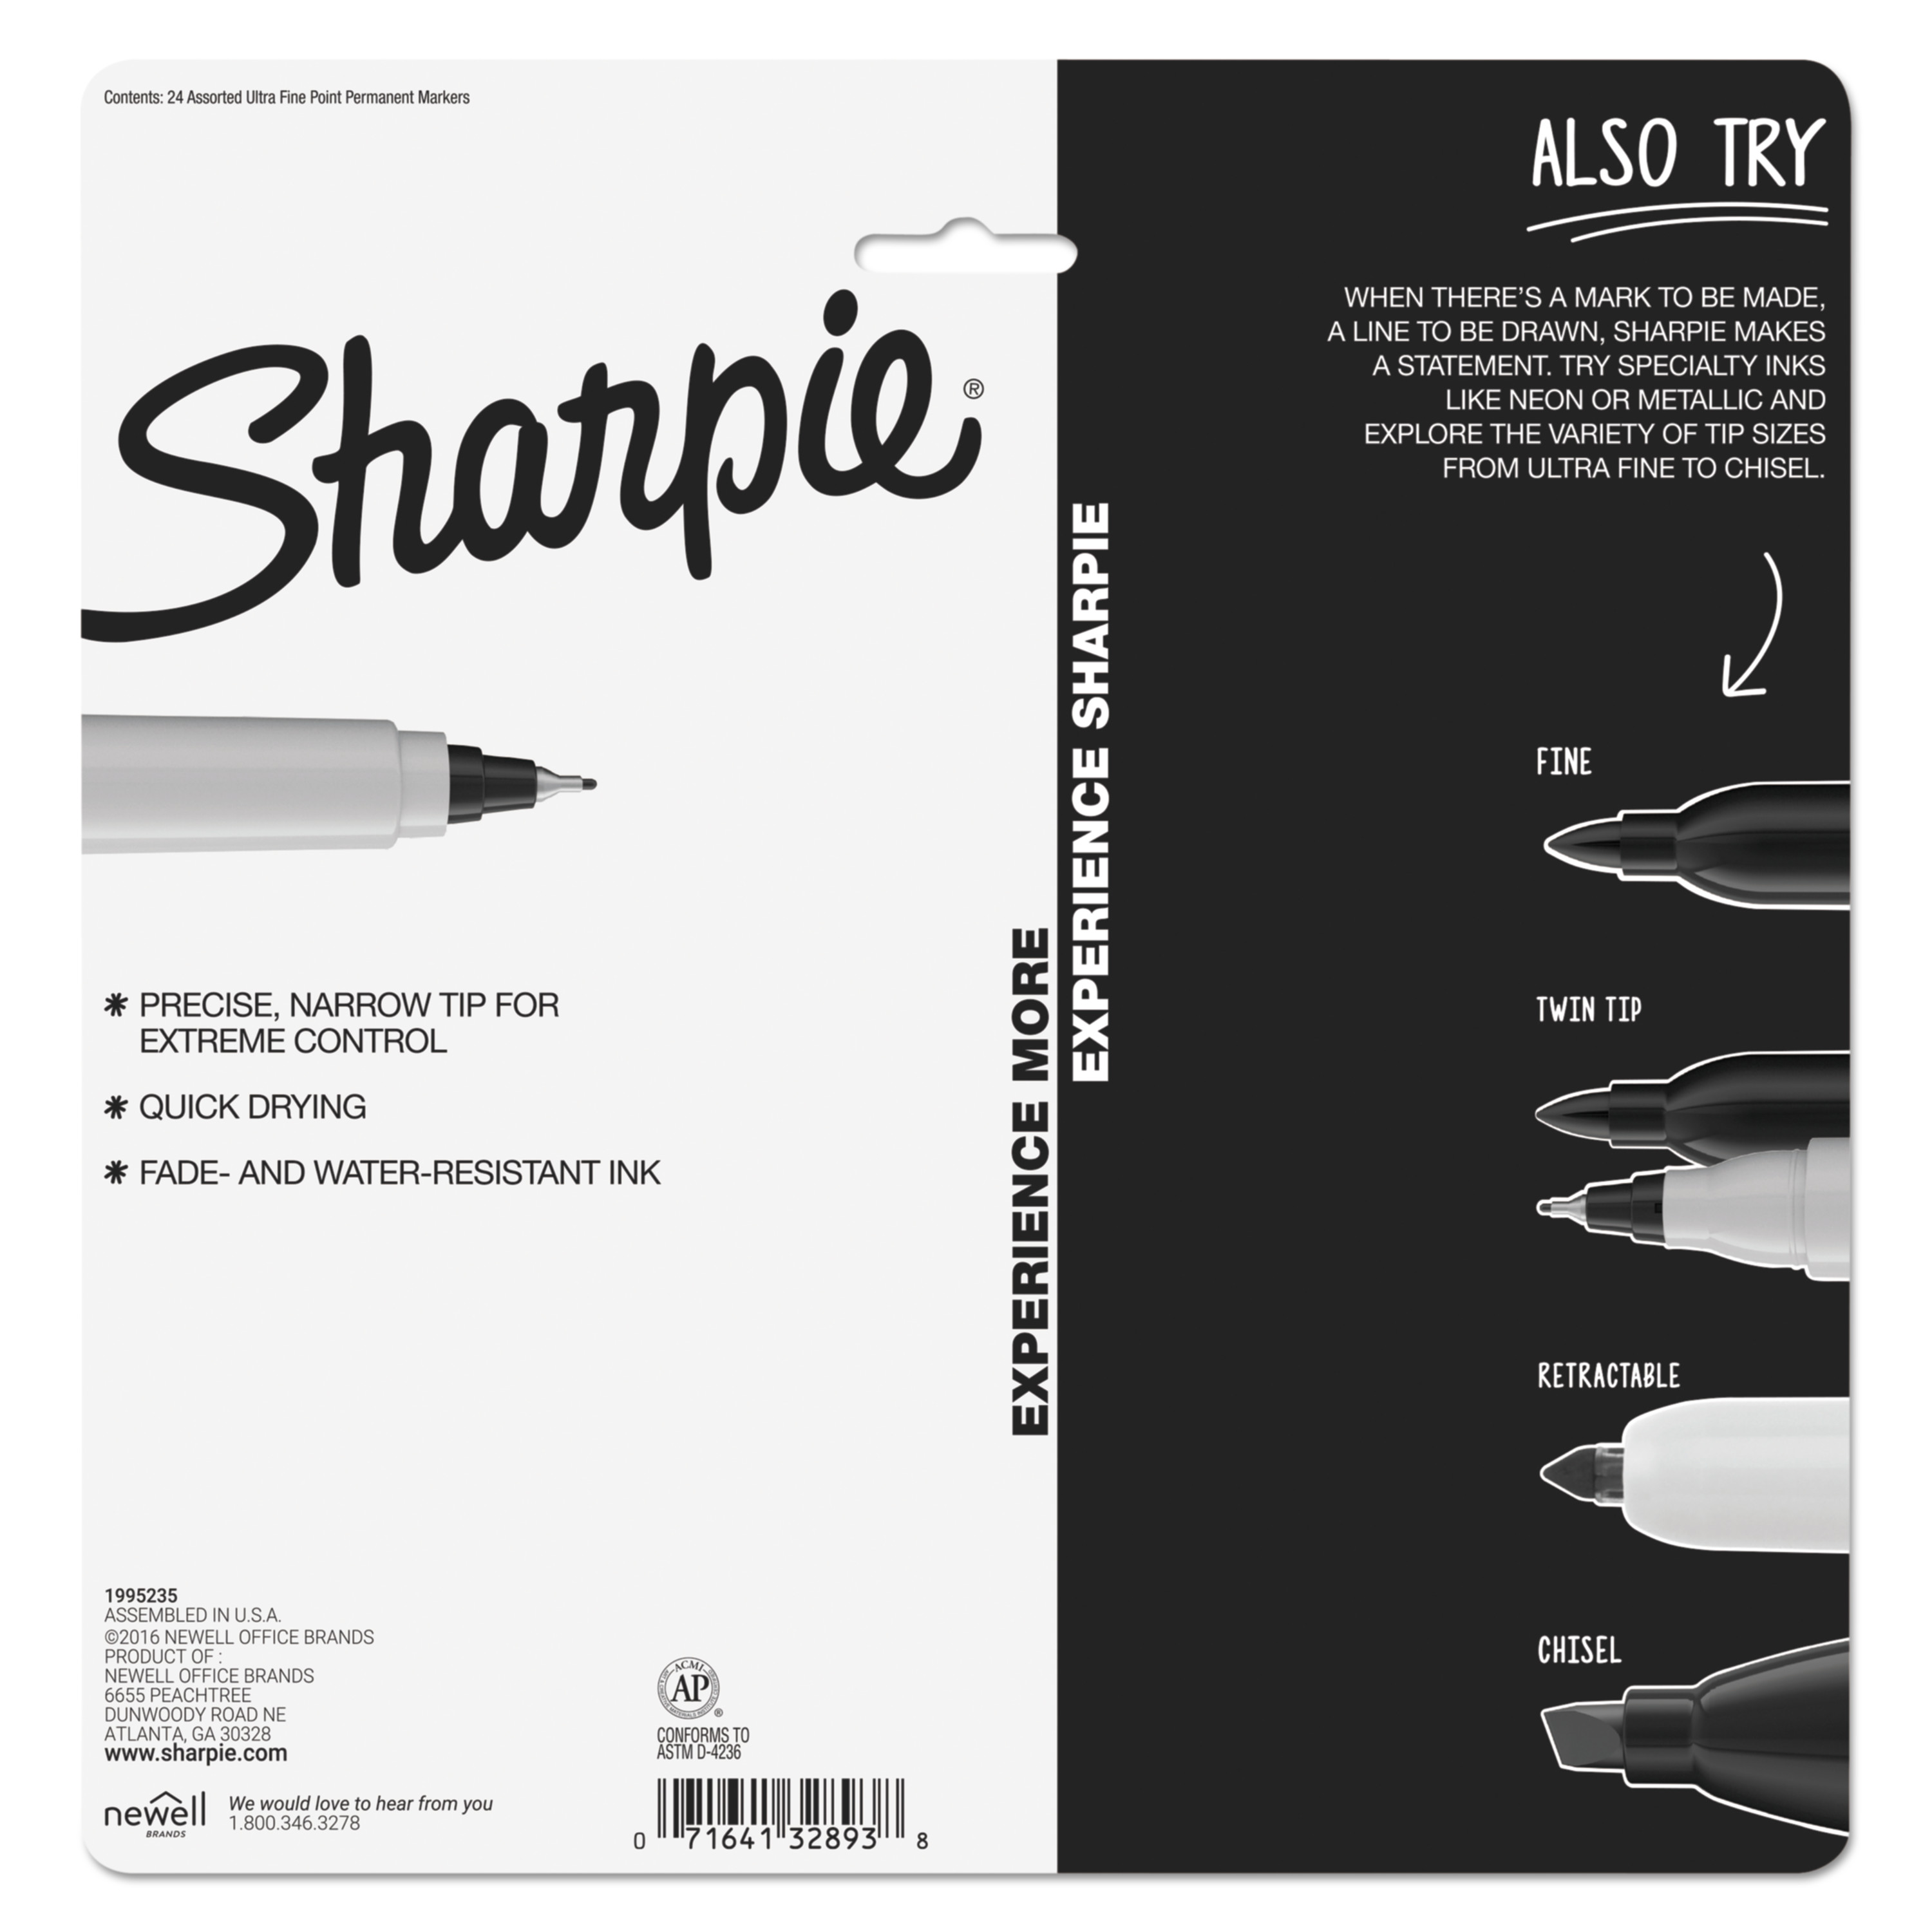 Sharpie Electro Pop Permanent Markers, Ultra Fine Point, Assorted Colors, 24 Count - image 5 of 8